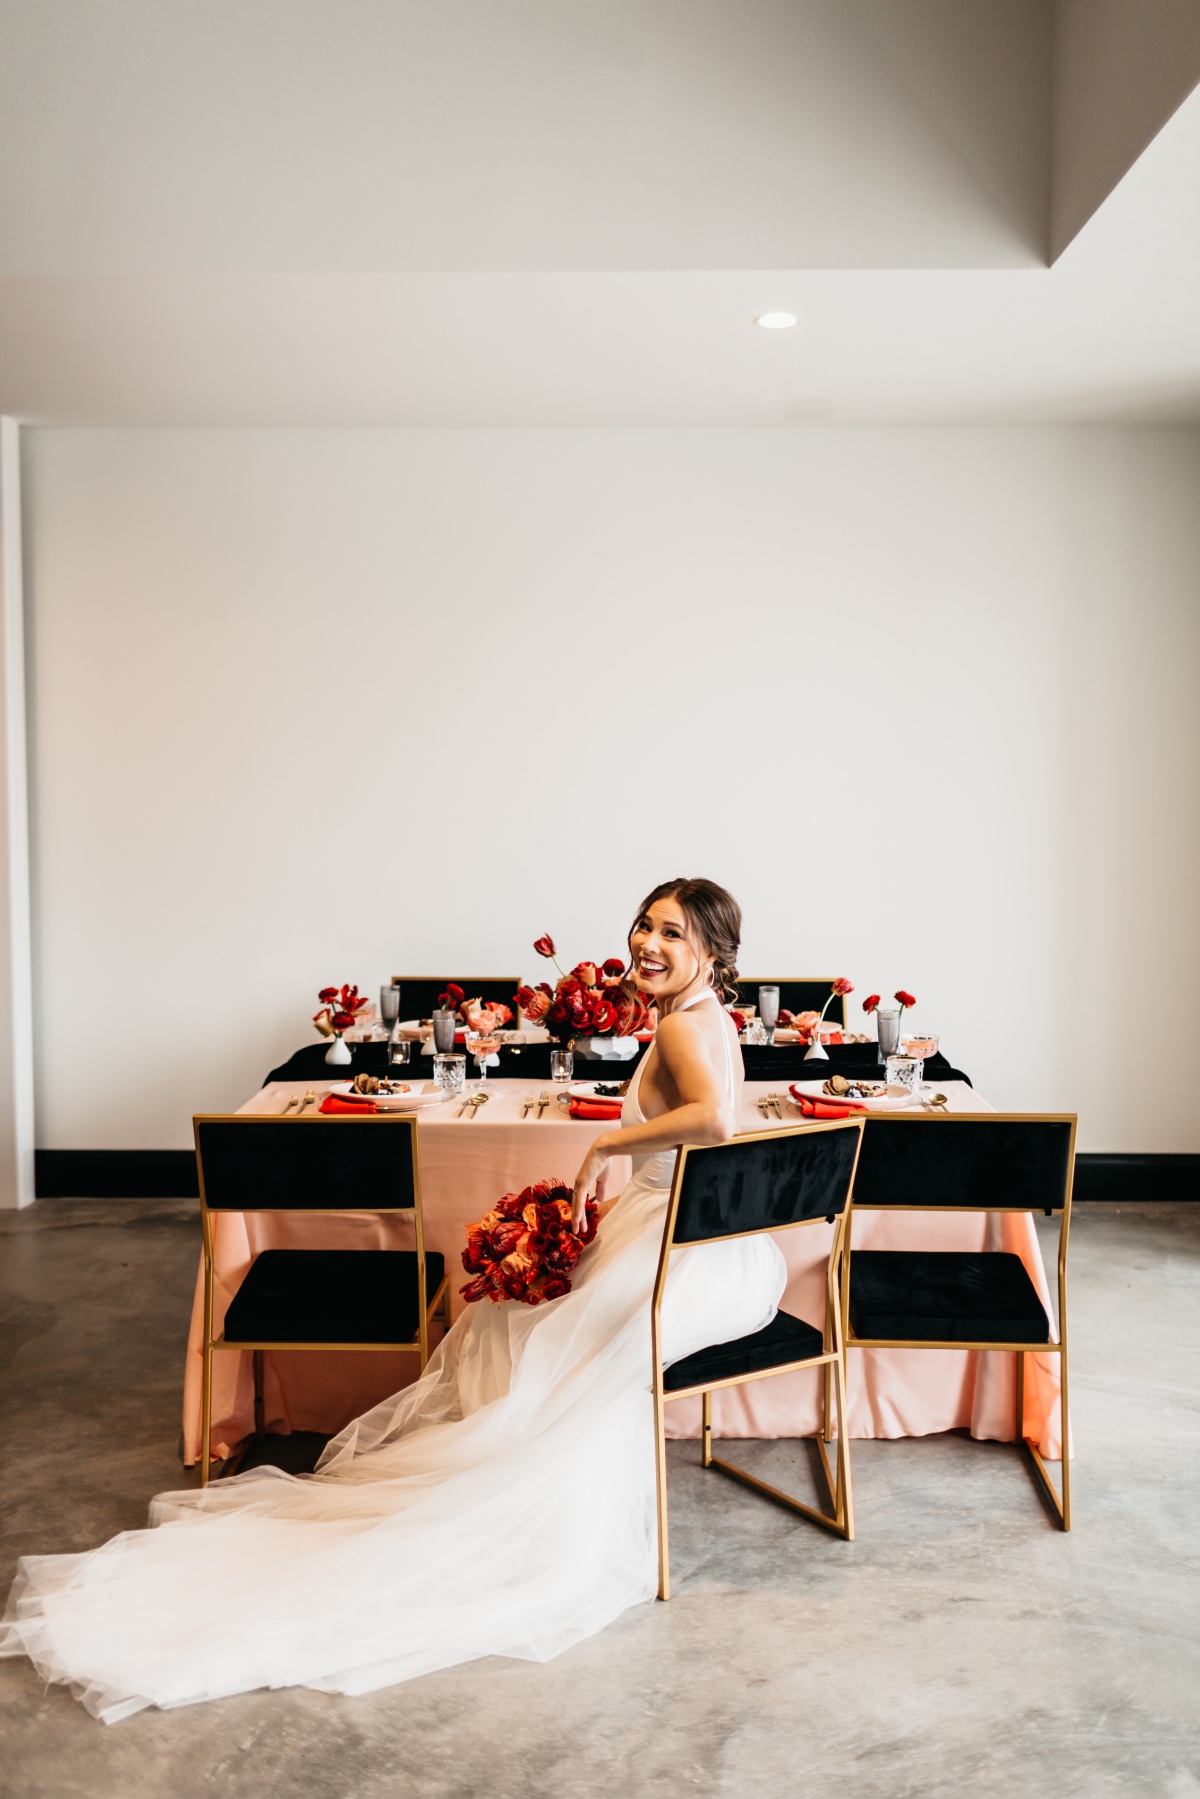 This Stylish Elopement Inspiration Shoot Will Have You Seeing Red...In a Good Way